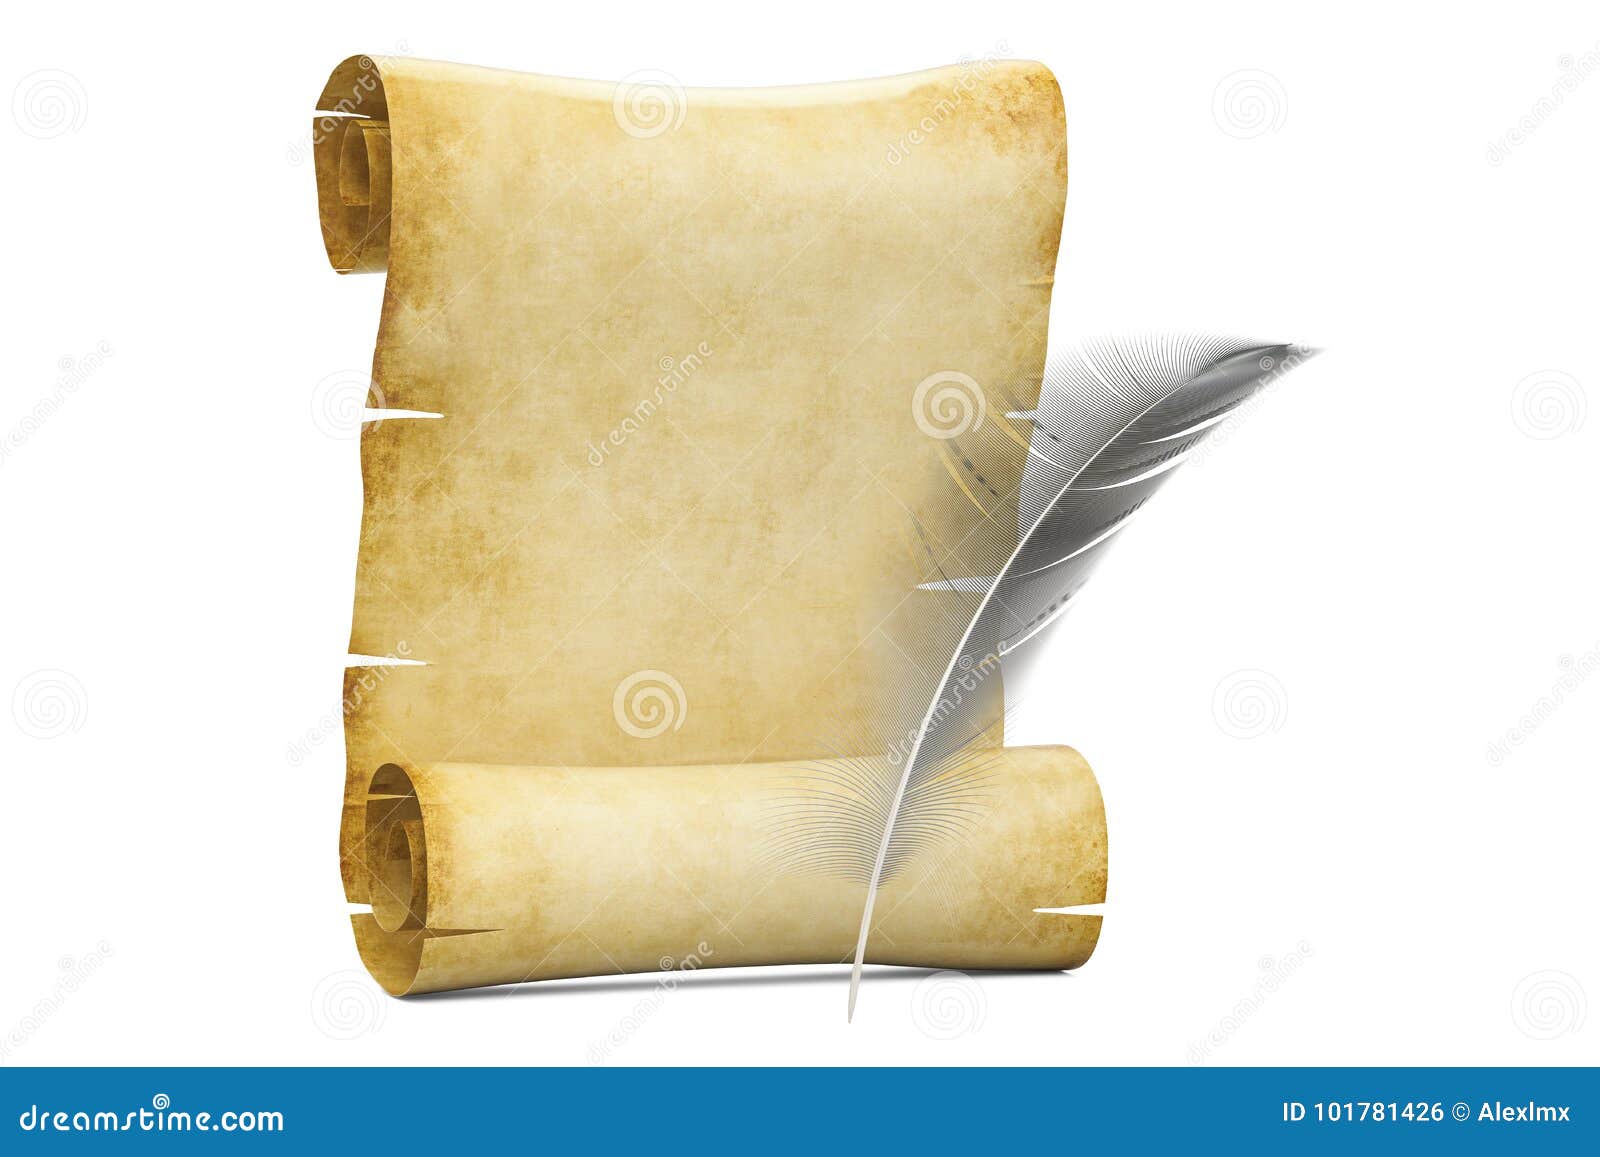 blank roll of papyrus with feather, 3d rendering